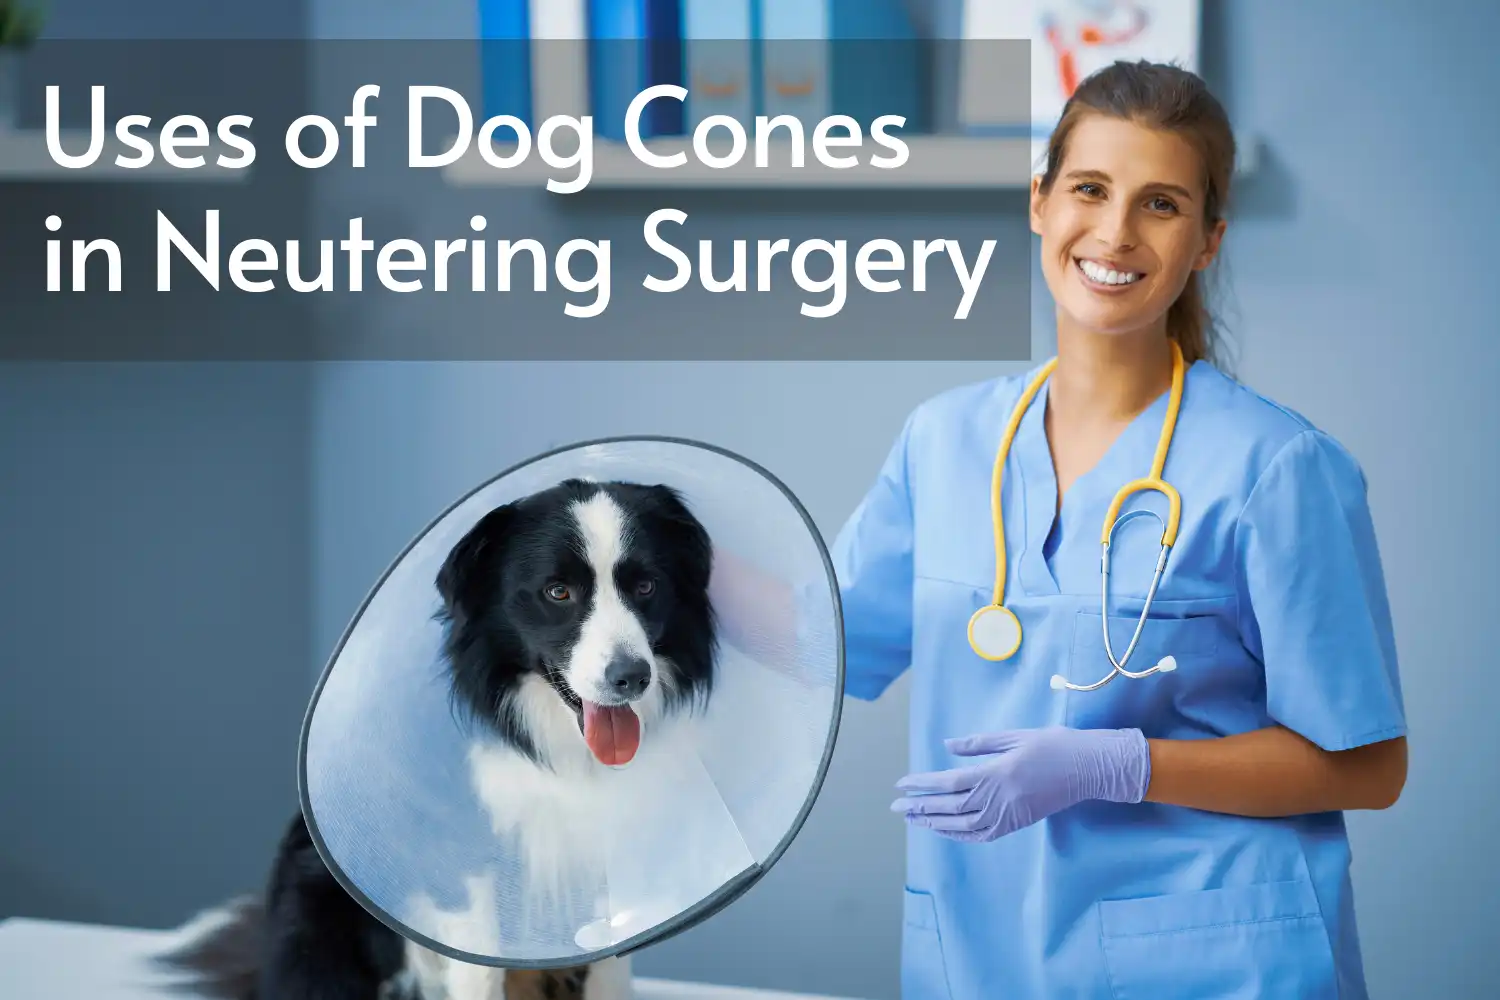 How Long Does Dog Wear Cone after Neuter? - Uses of Dog Cones in Neutering Surgery